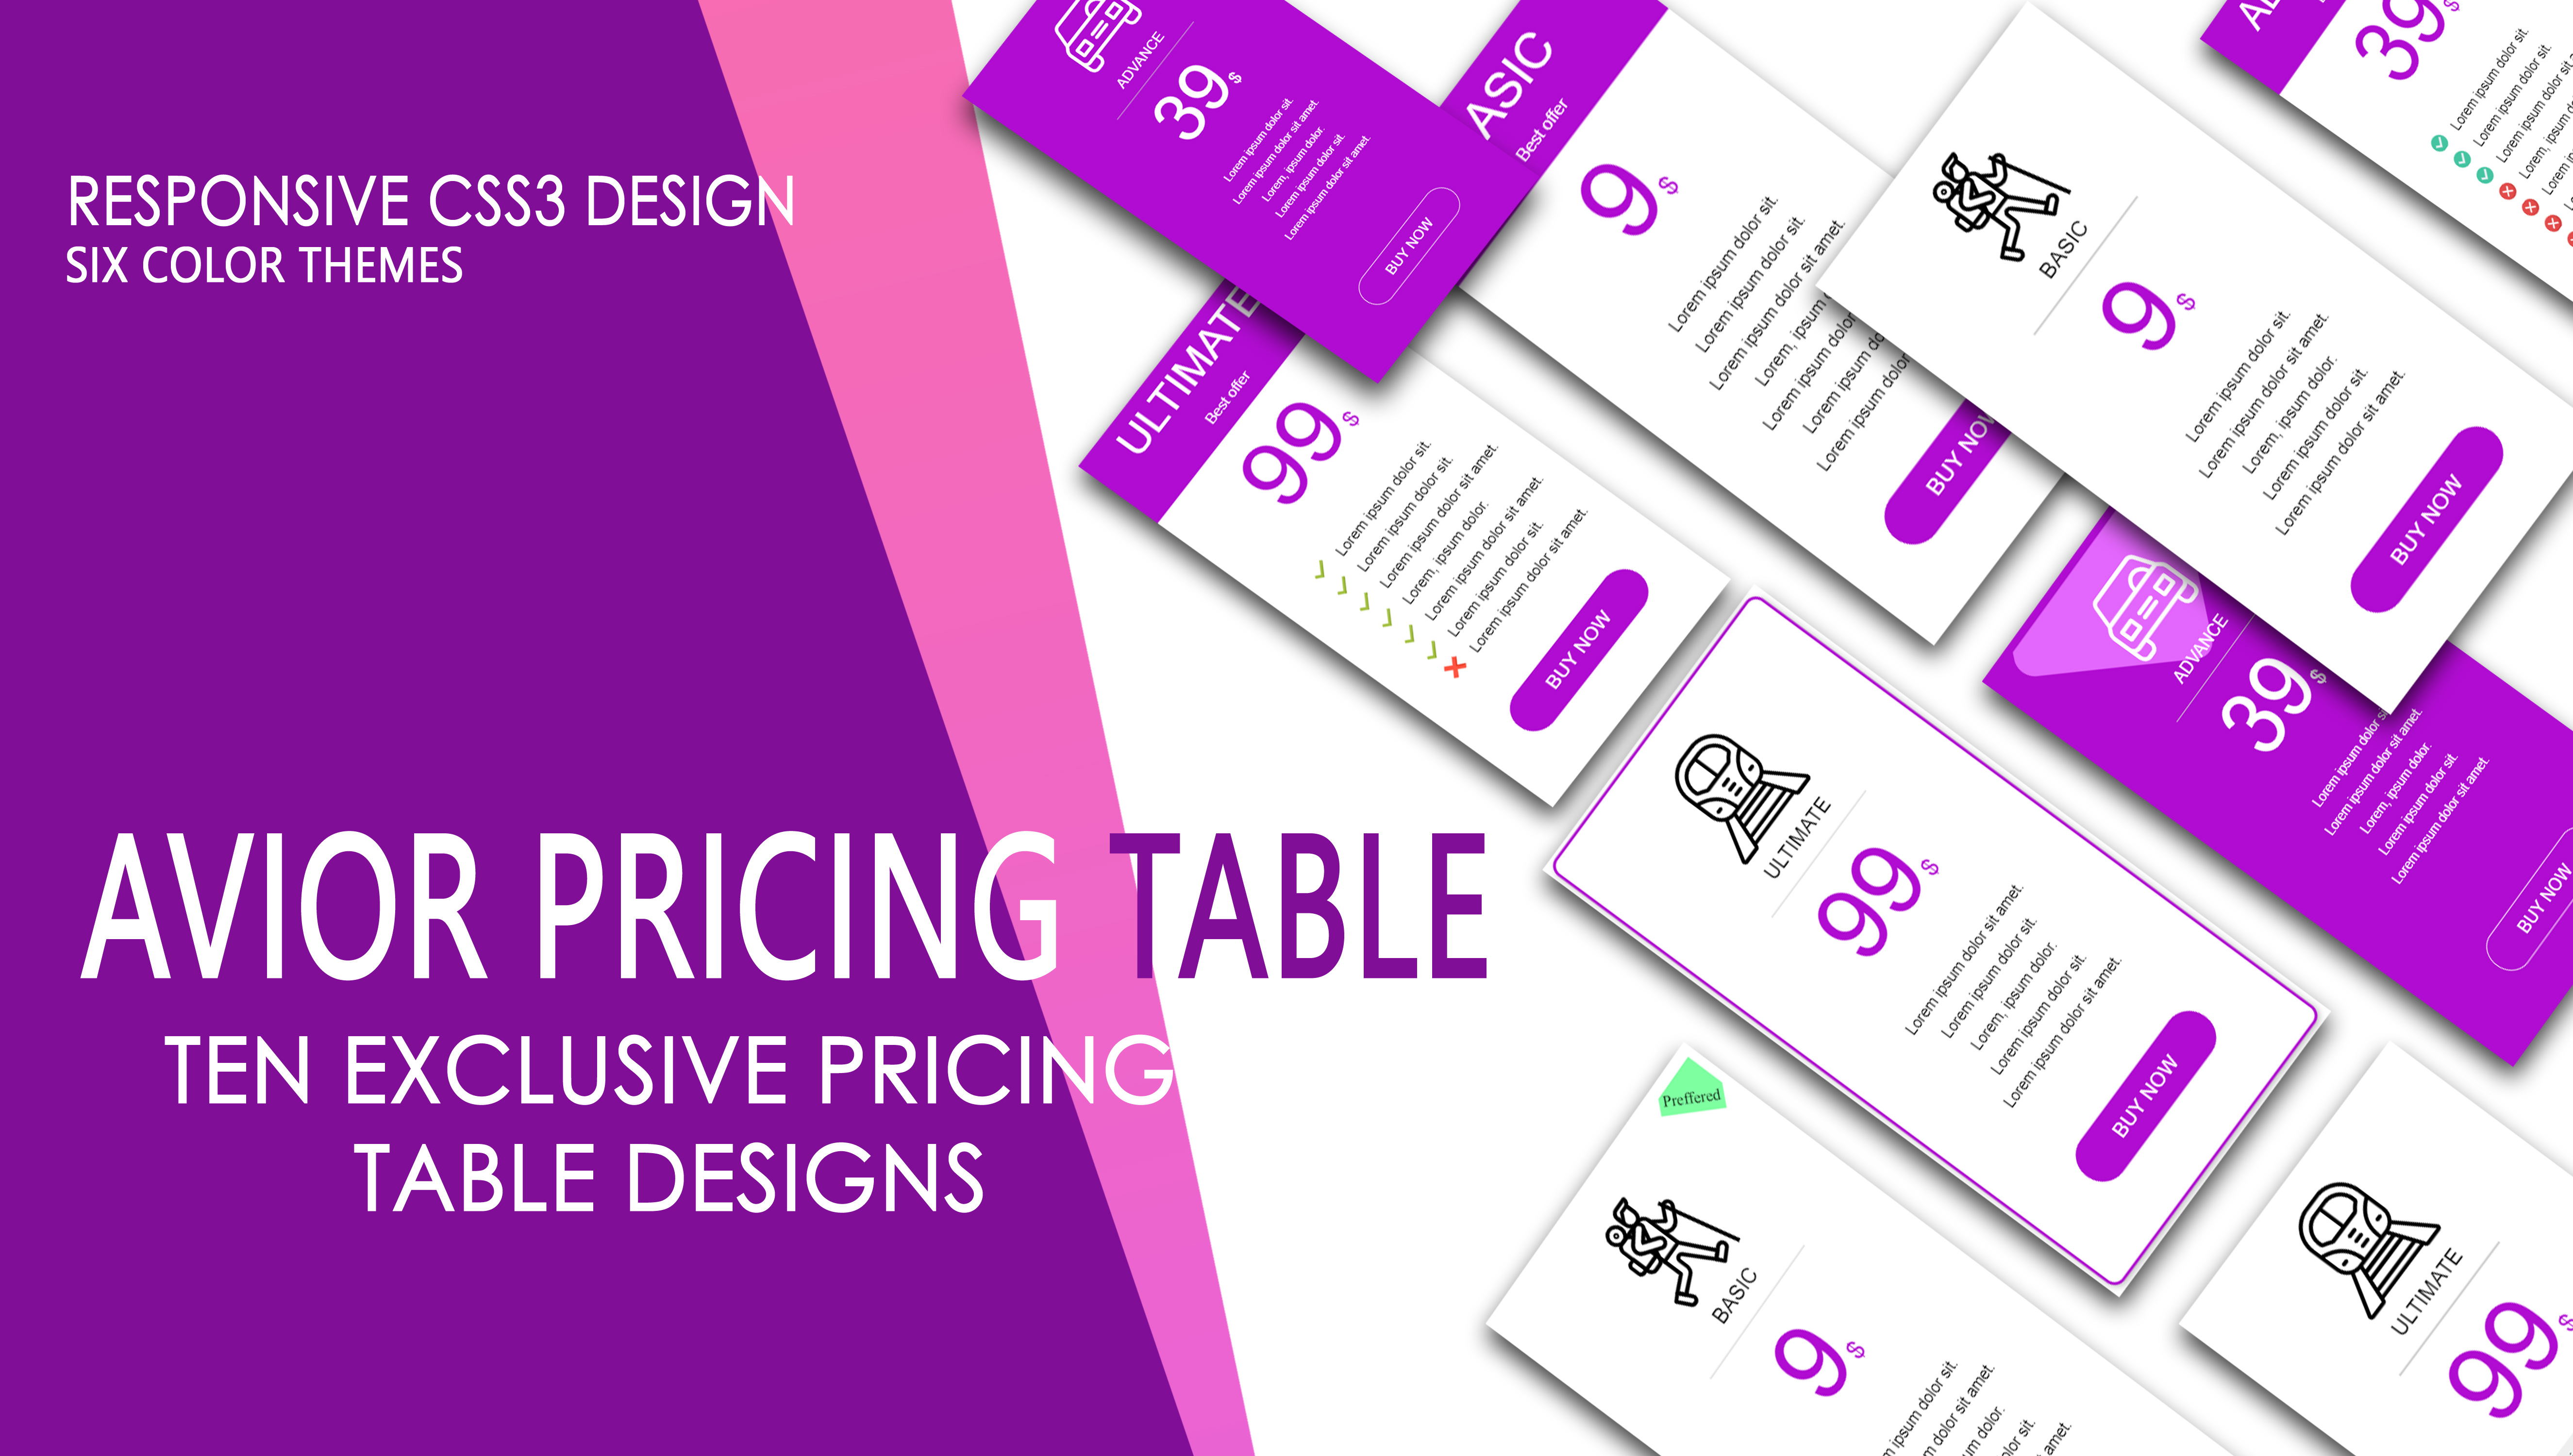 AVIOR Pricing tables